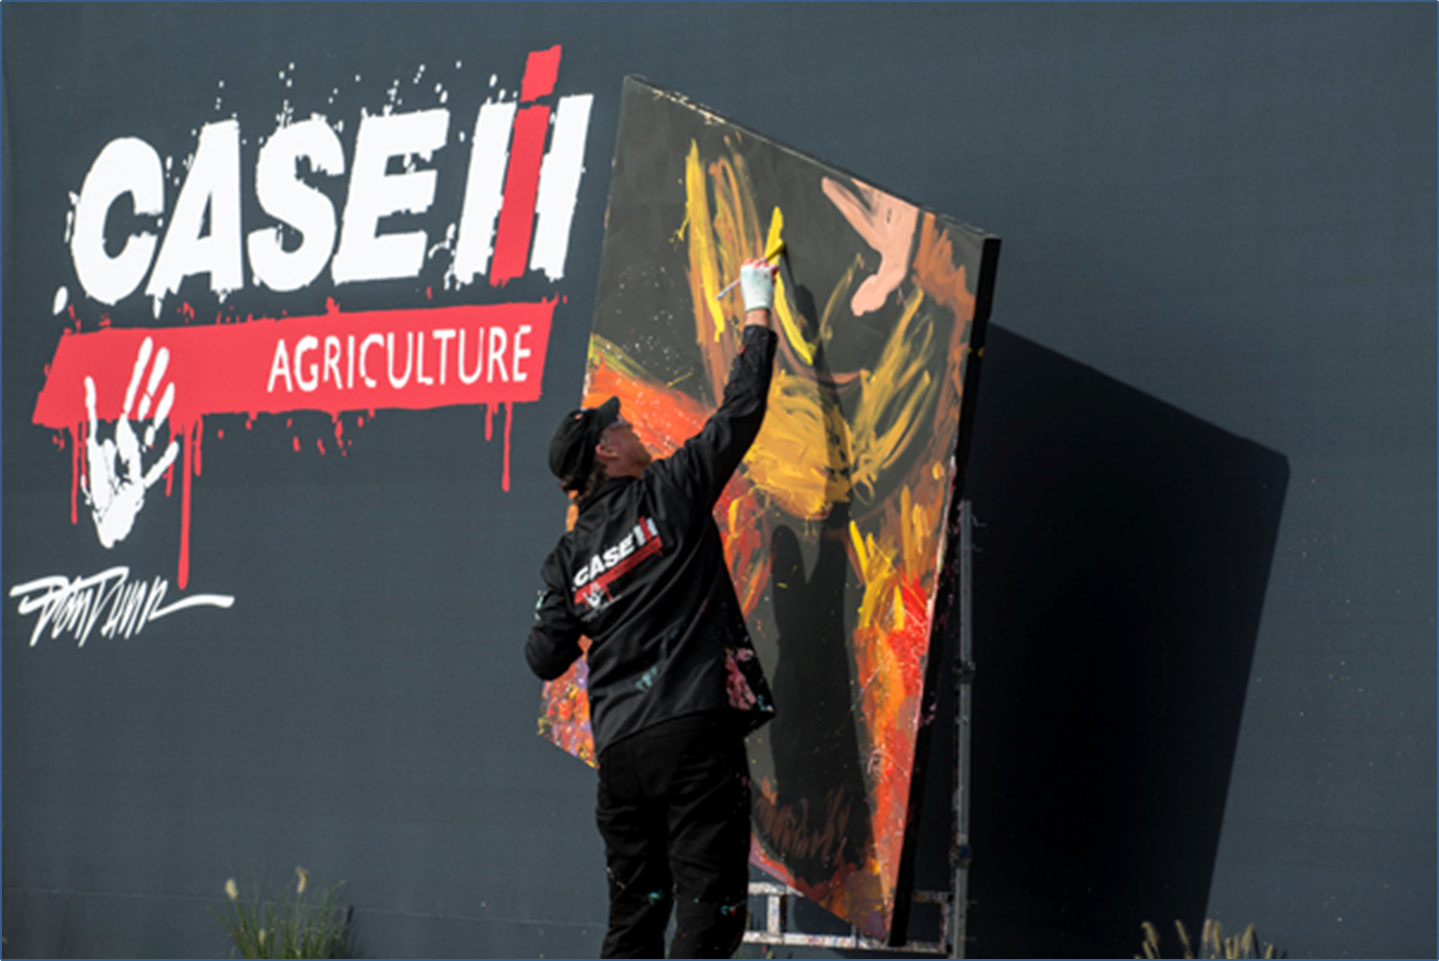 Dan Dunn, Paintjam speed painter, creates a painting commemorating “Year of the Farmer” during the Case IH arena show